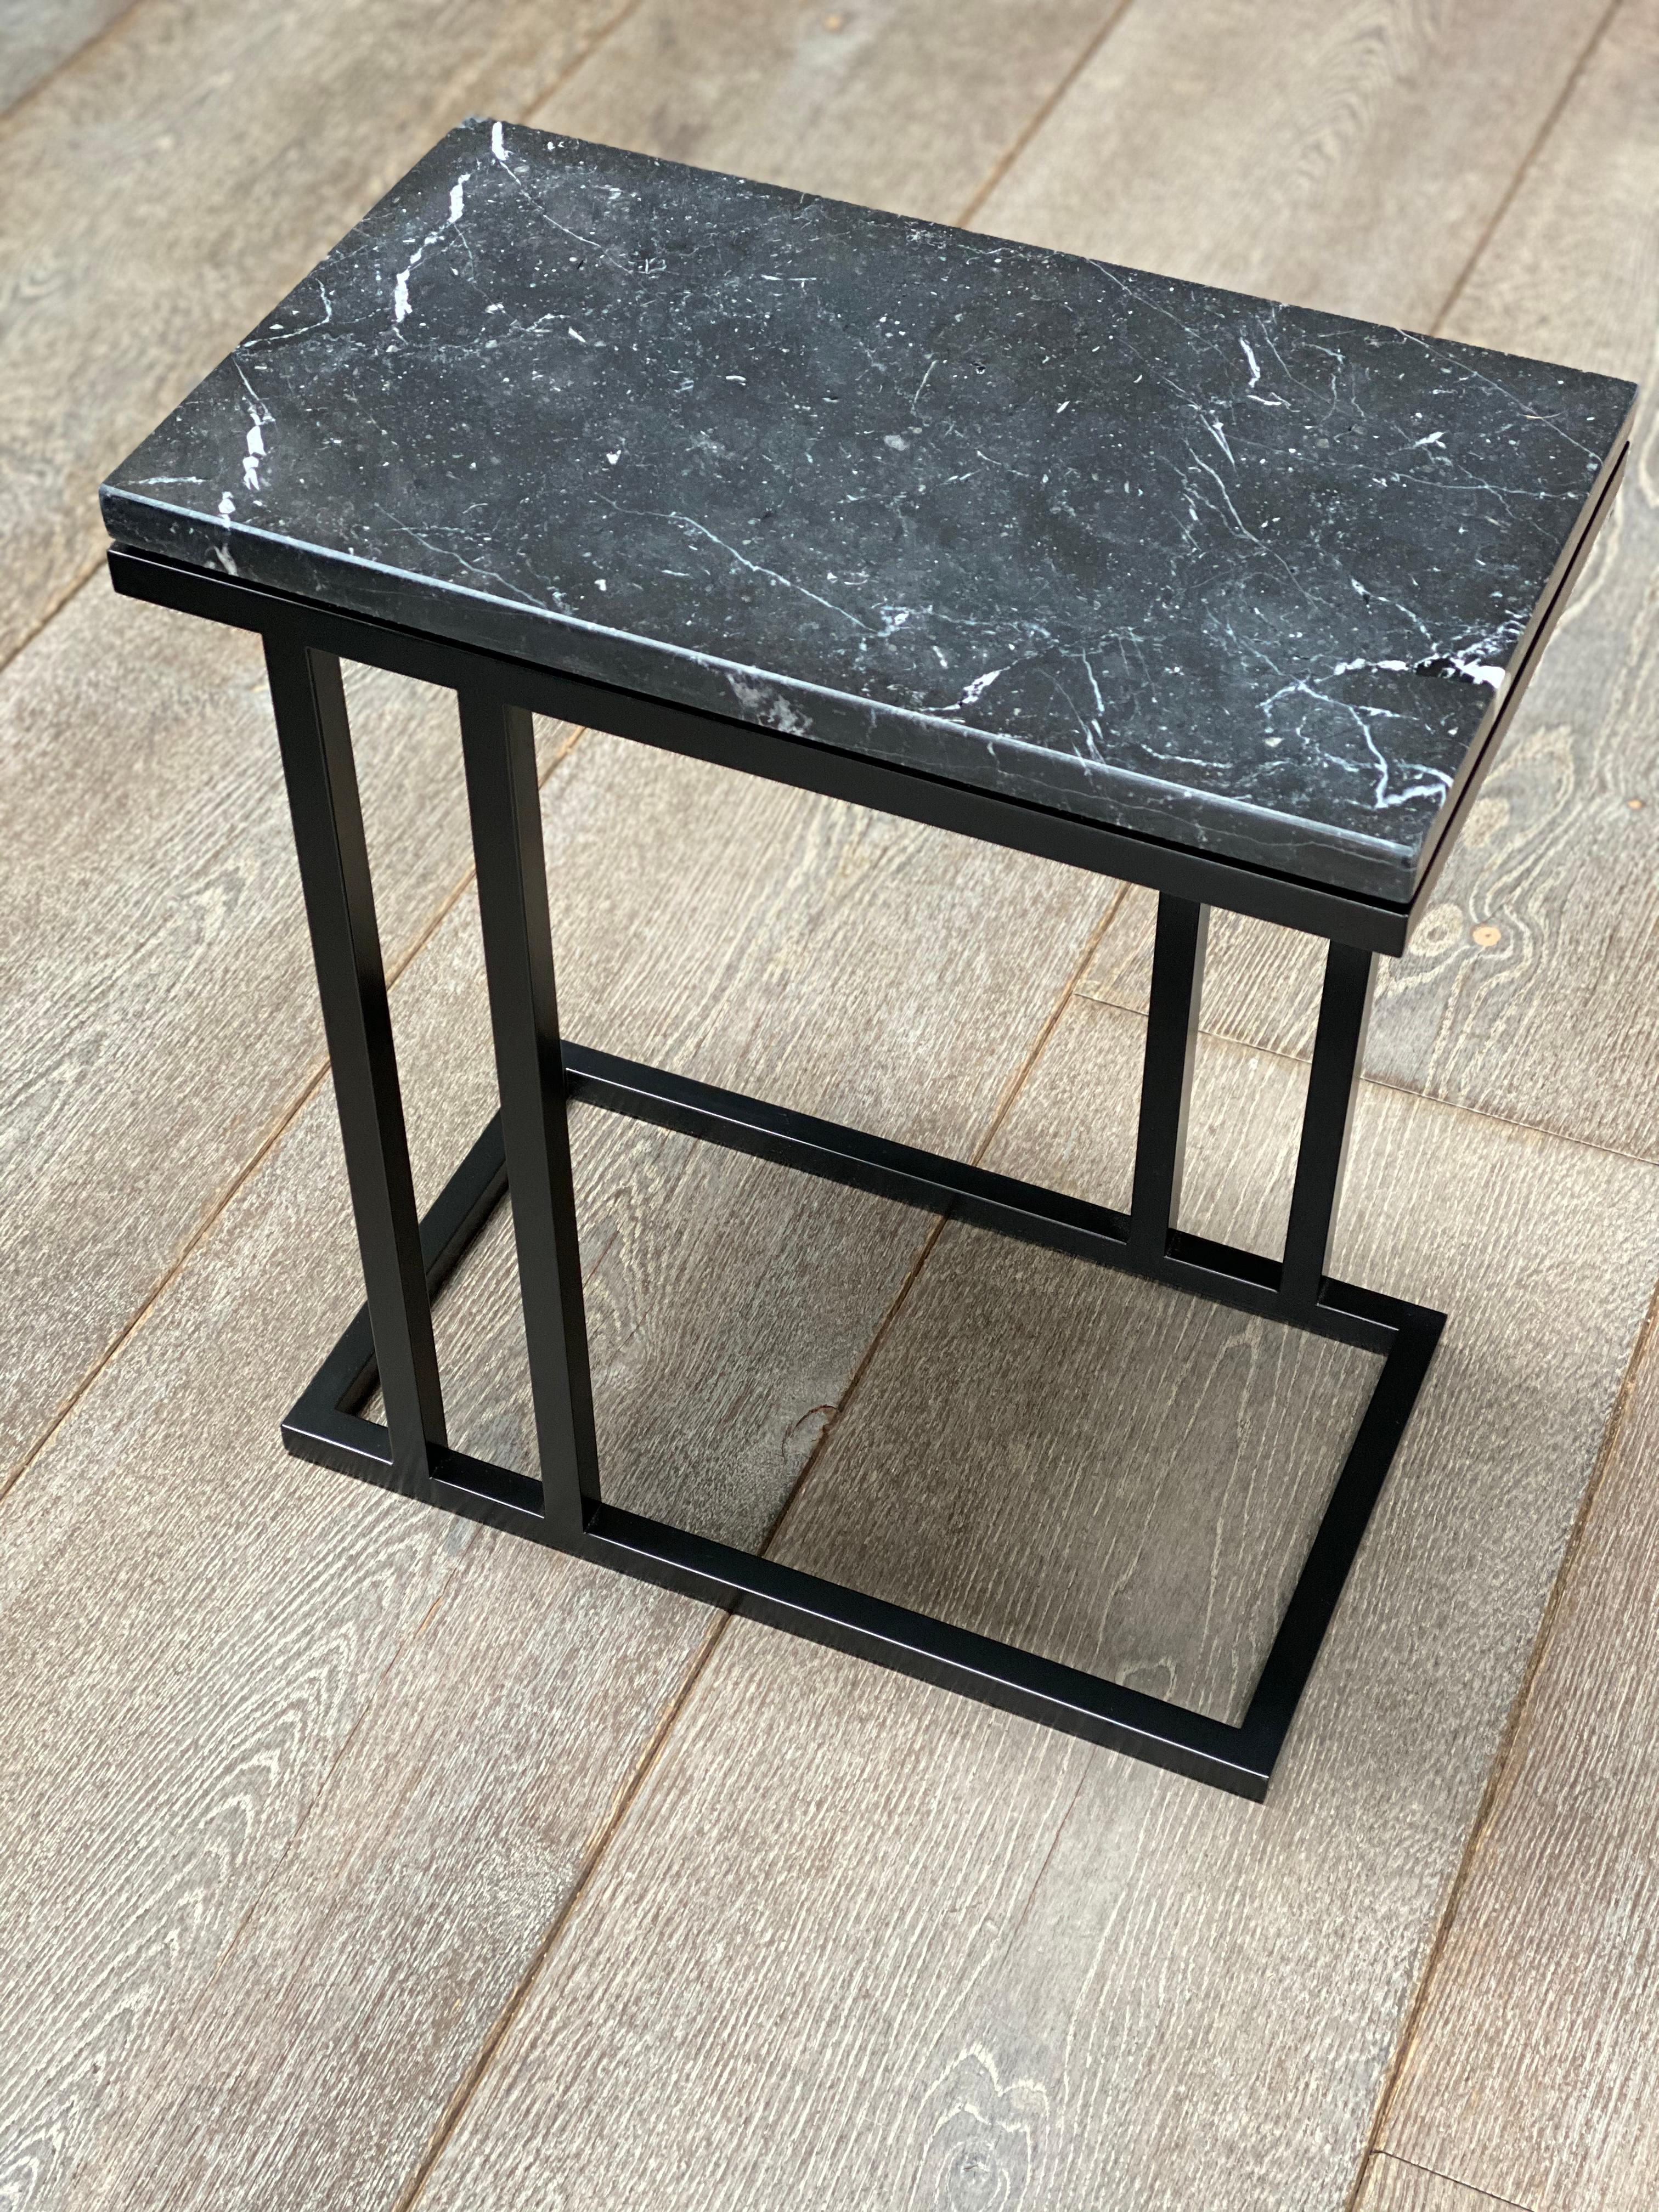 Art Deco Inspired Elio II Slim Side Table Black Powder Coated and Marble In New Condition For Sale In London, GB